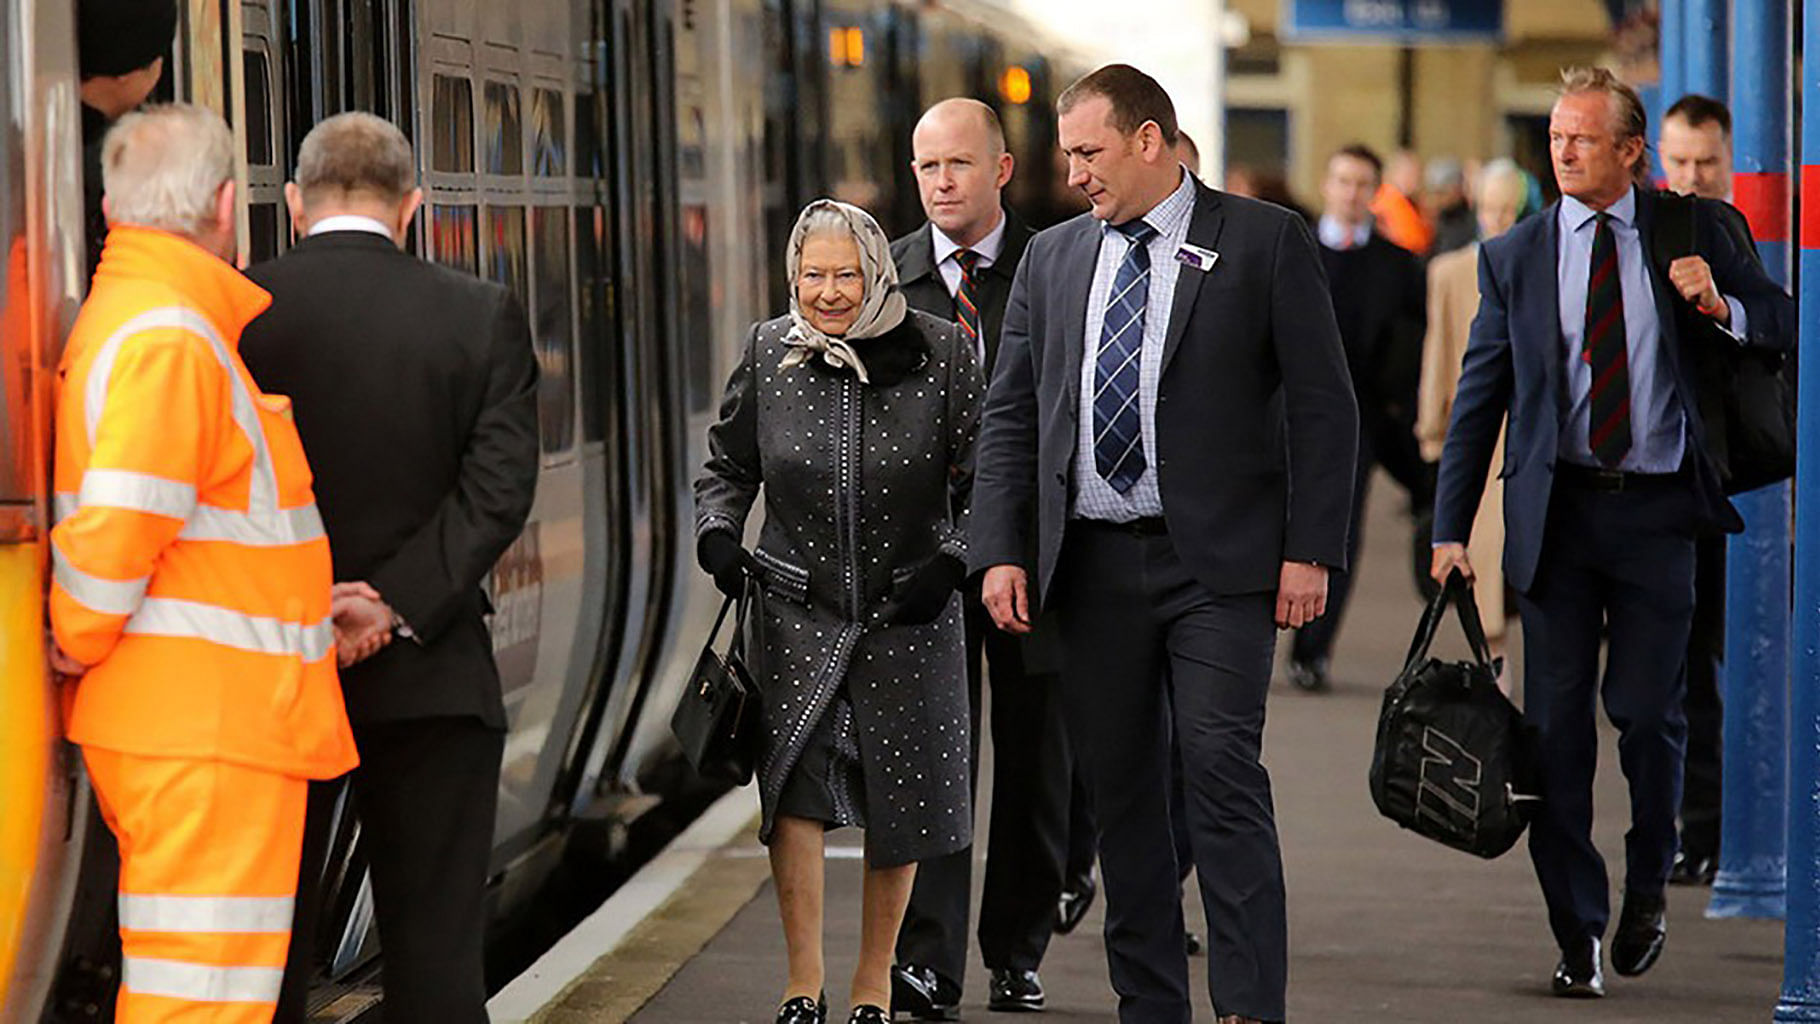 Queen Elizabeth II being escorted by the station manager. (Photo: <a href="https://twitter.com/Telegraph/status/696937097836498948">Twitter</a>)